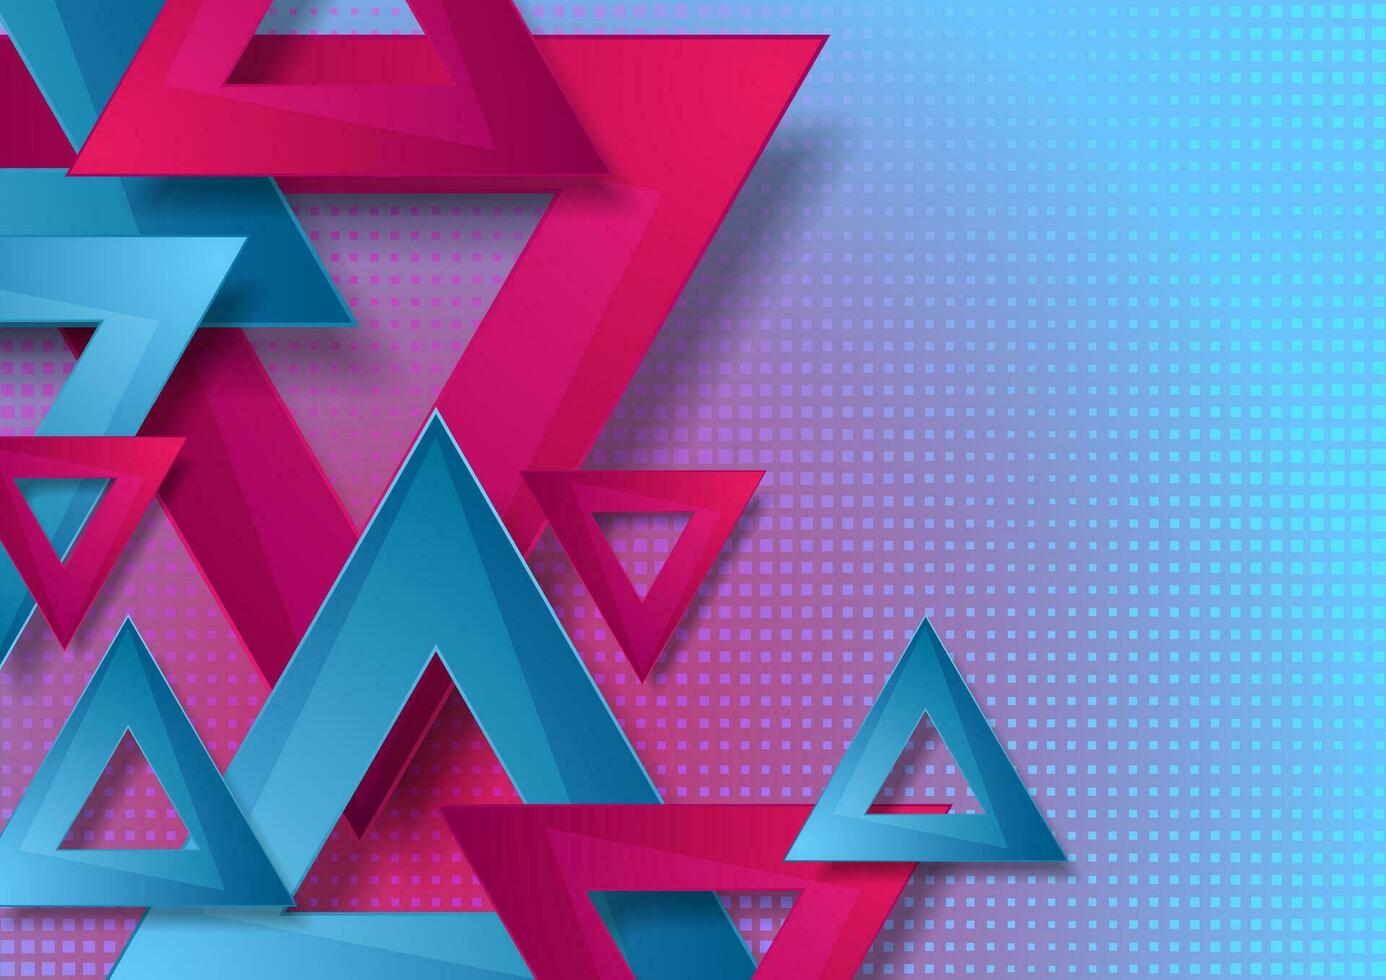 Vibrant pink and blue triangles abstract background vector